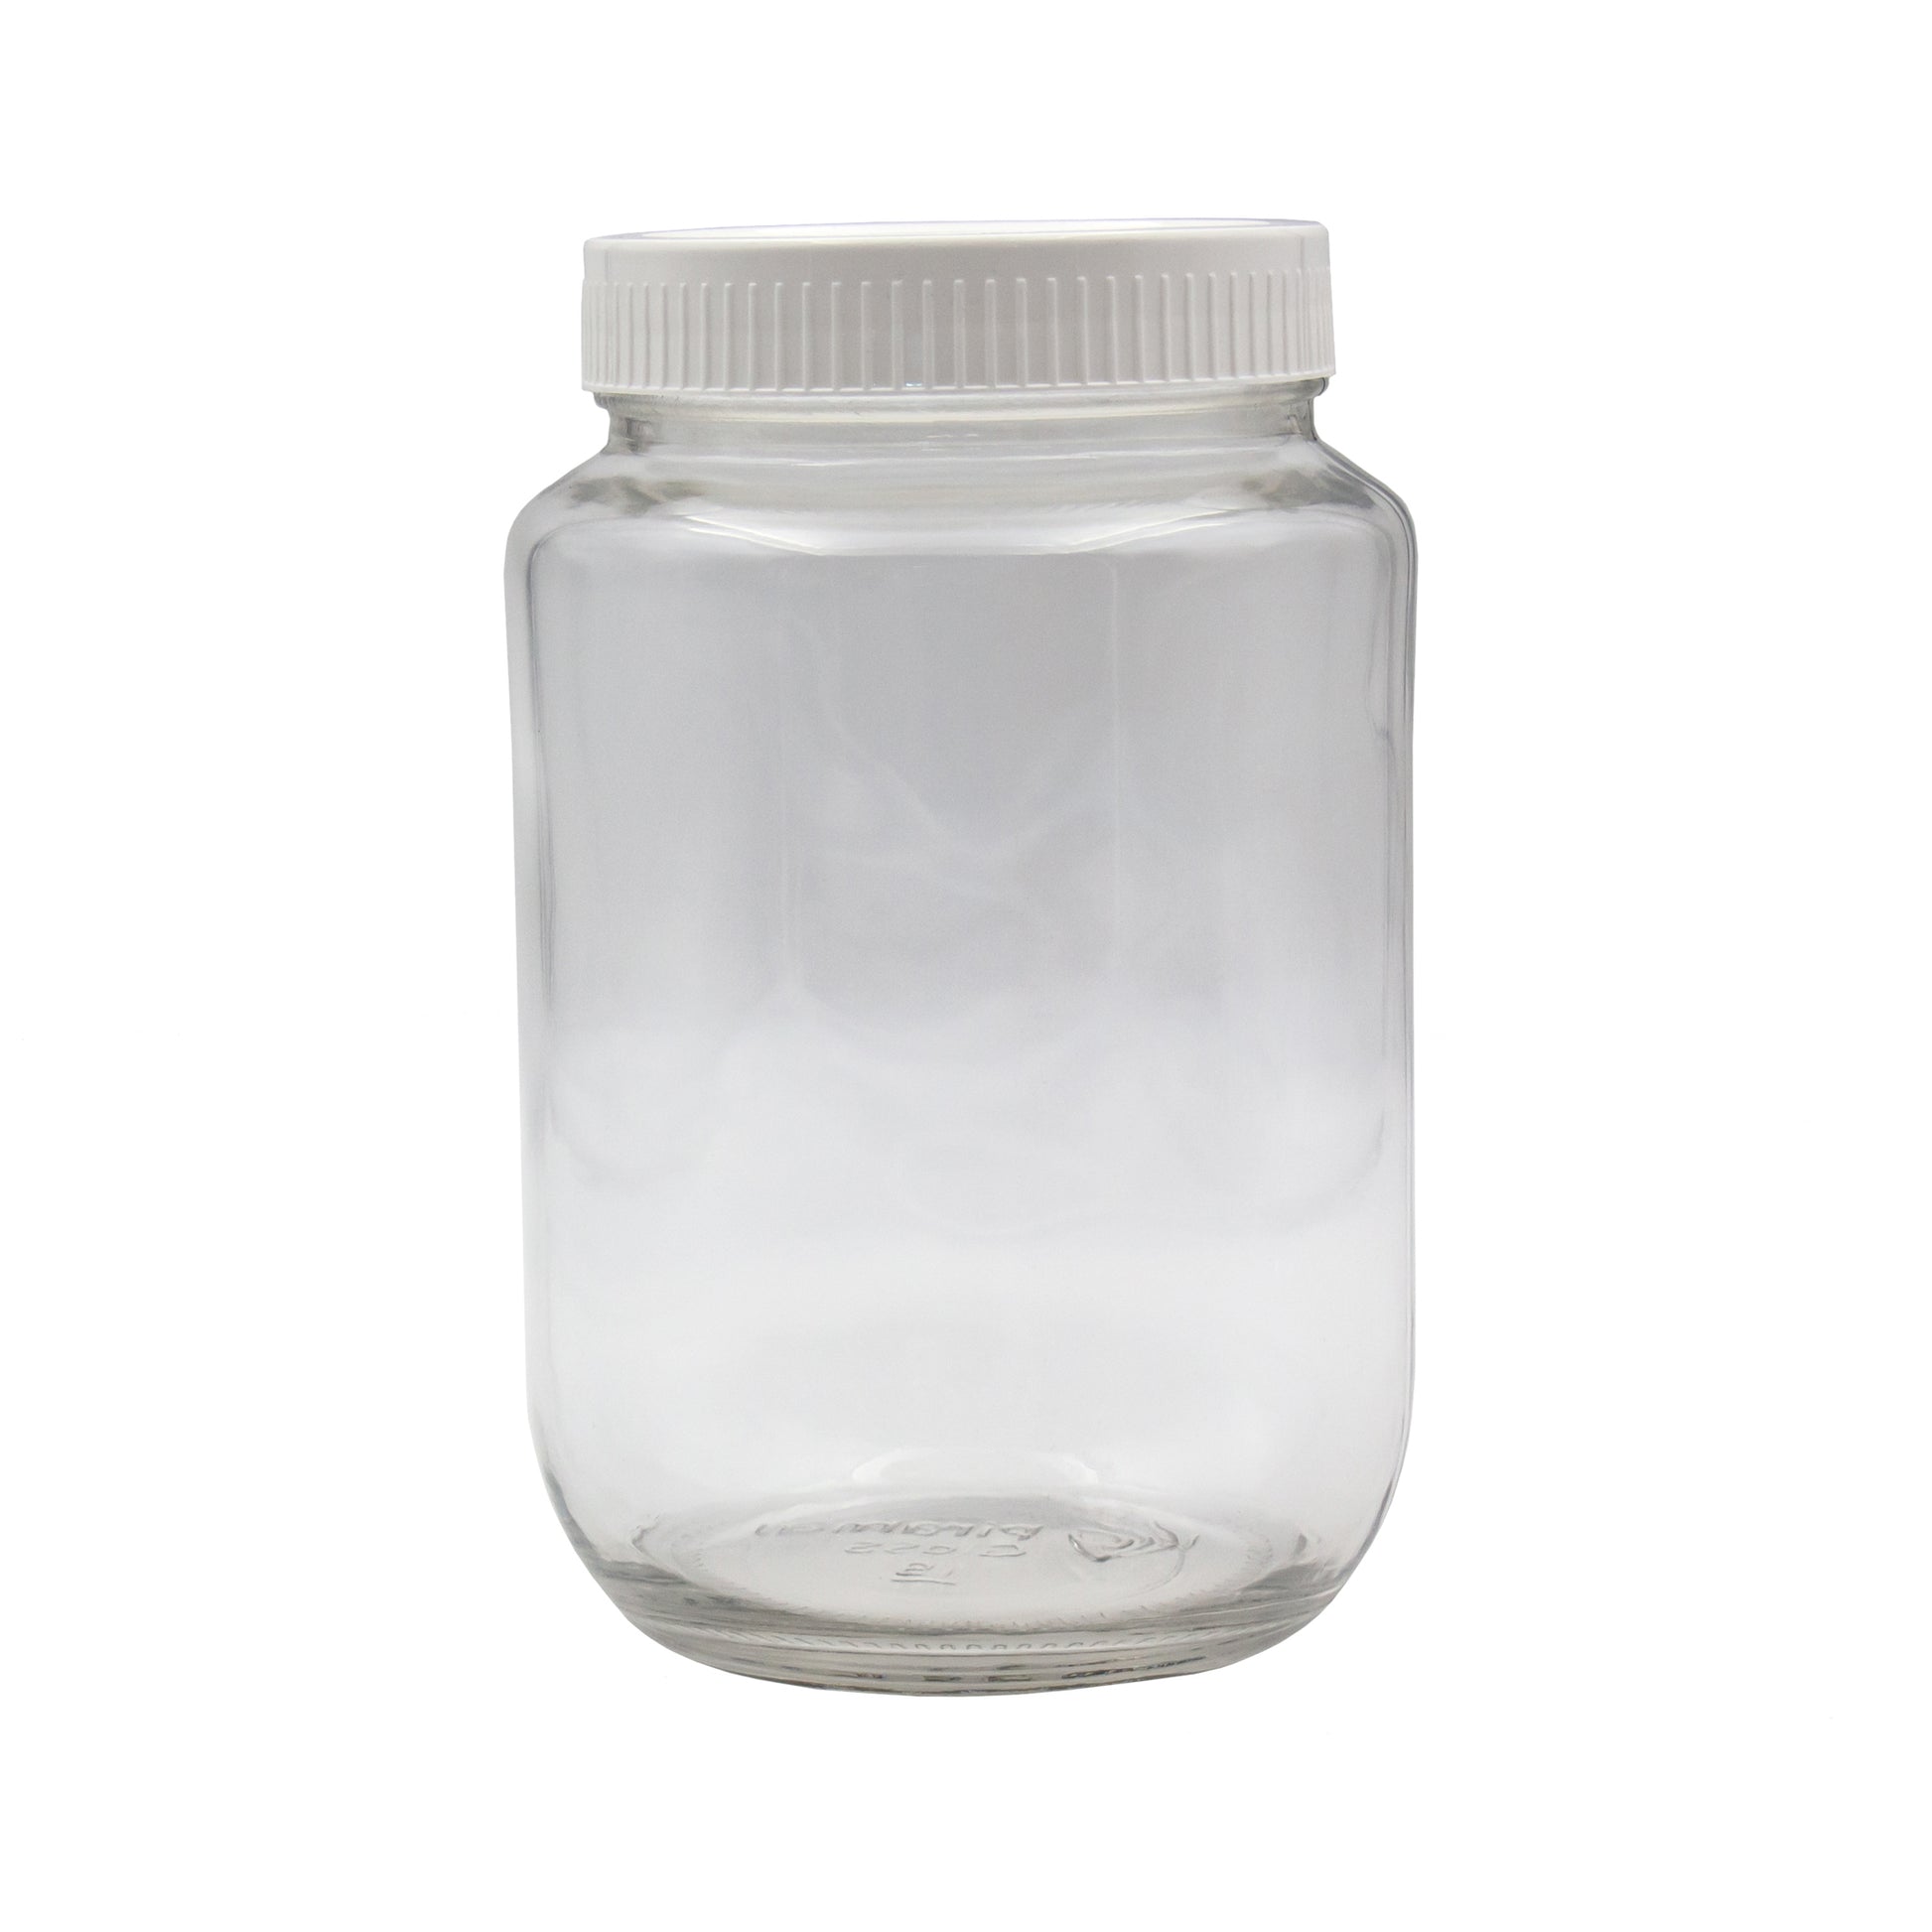 1.5 litre glass jar with white plastic lid